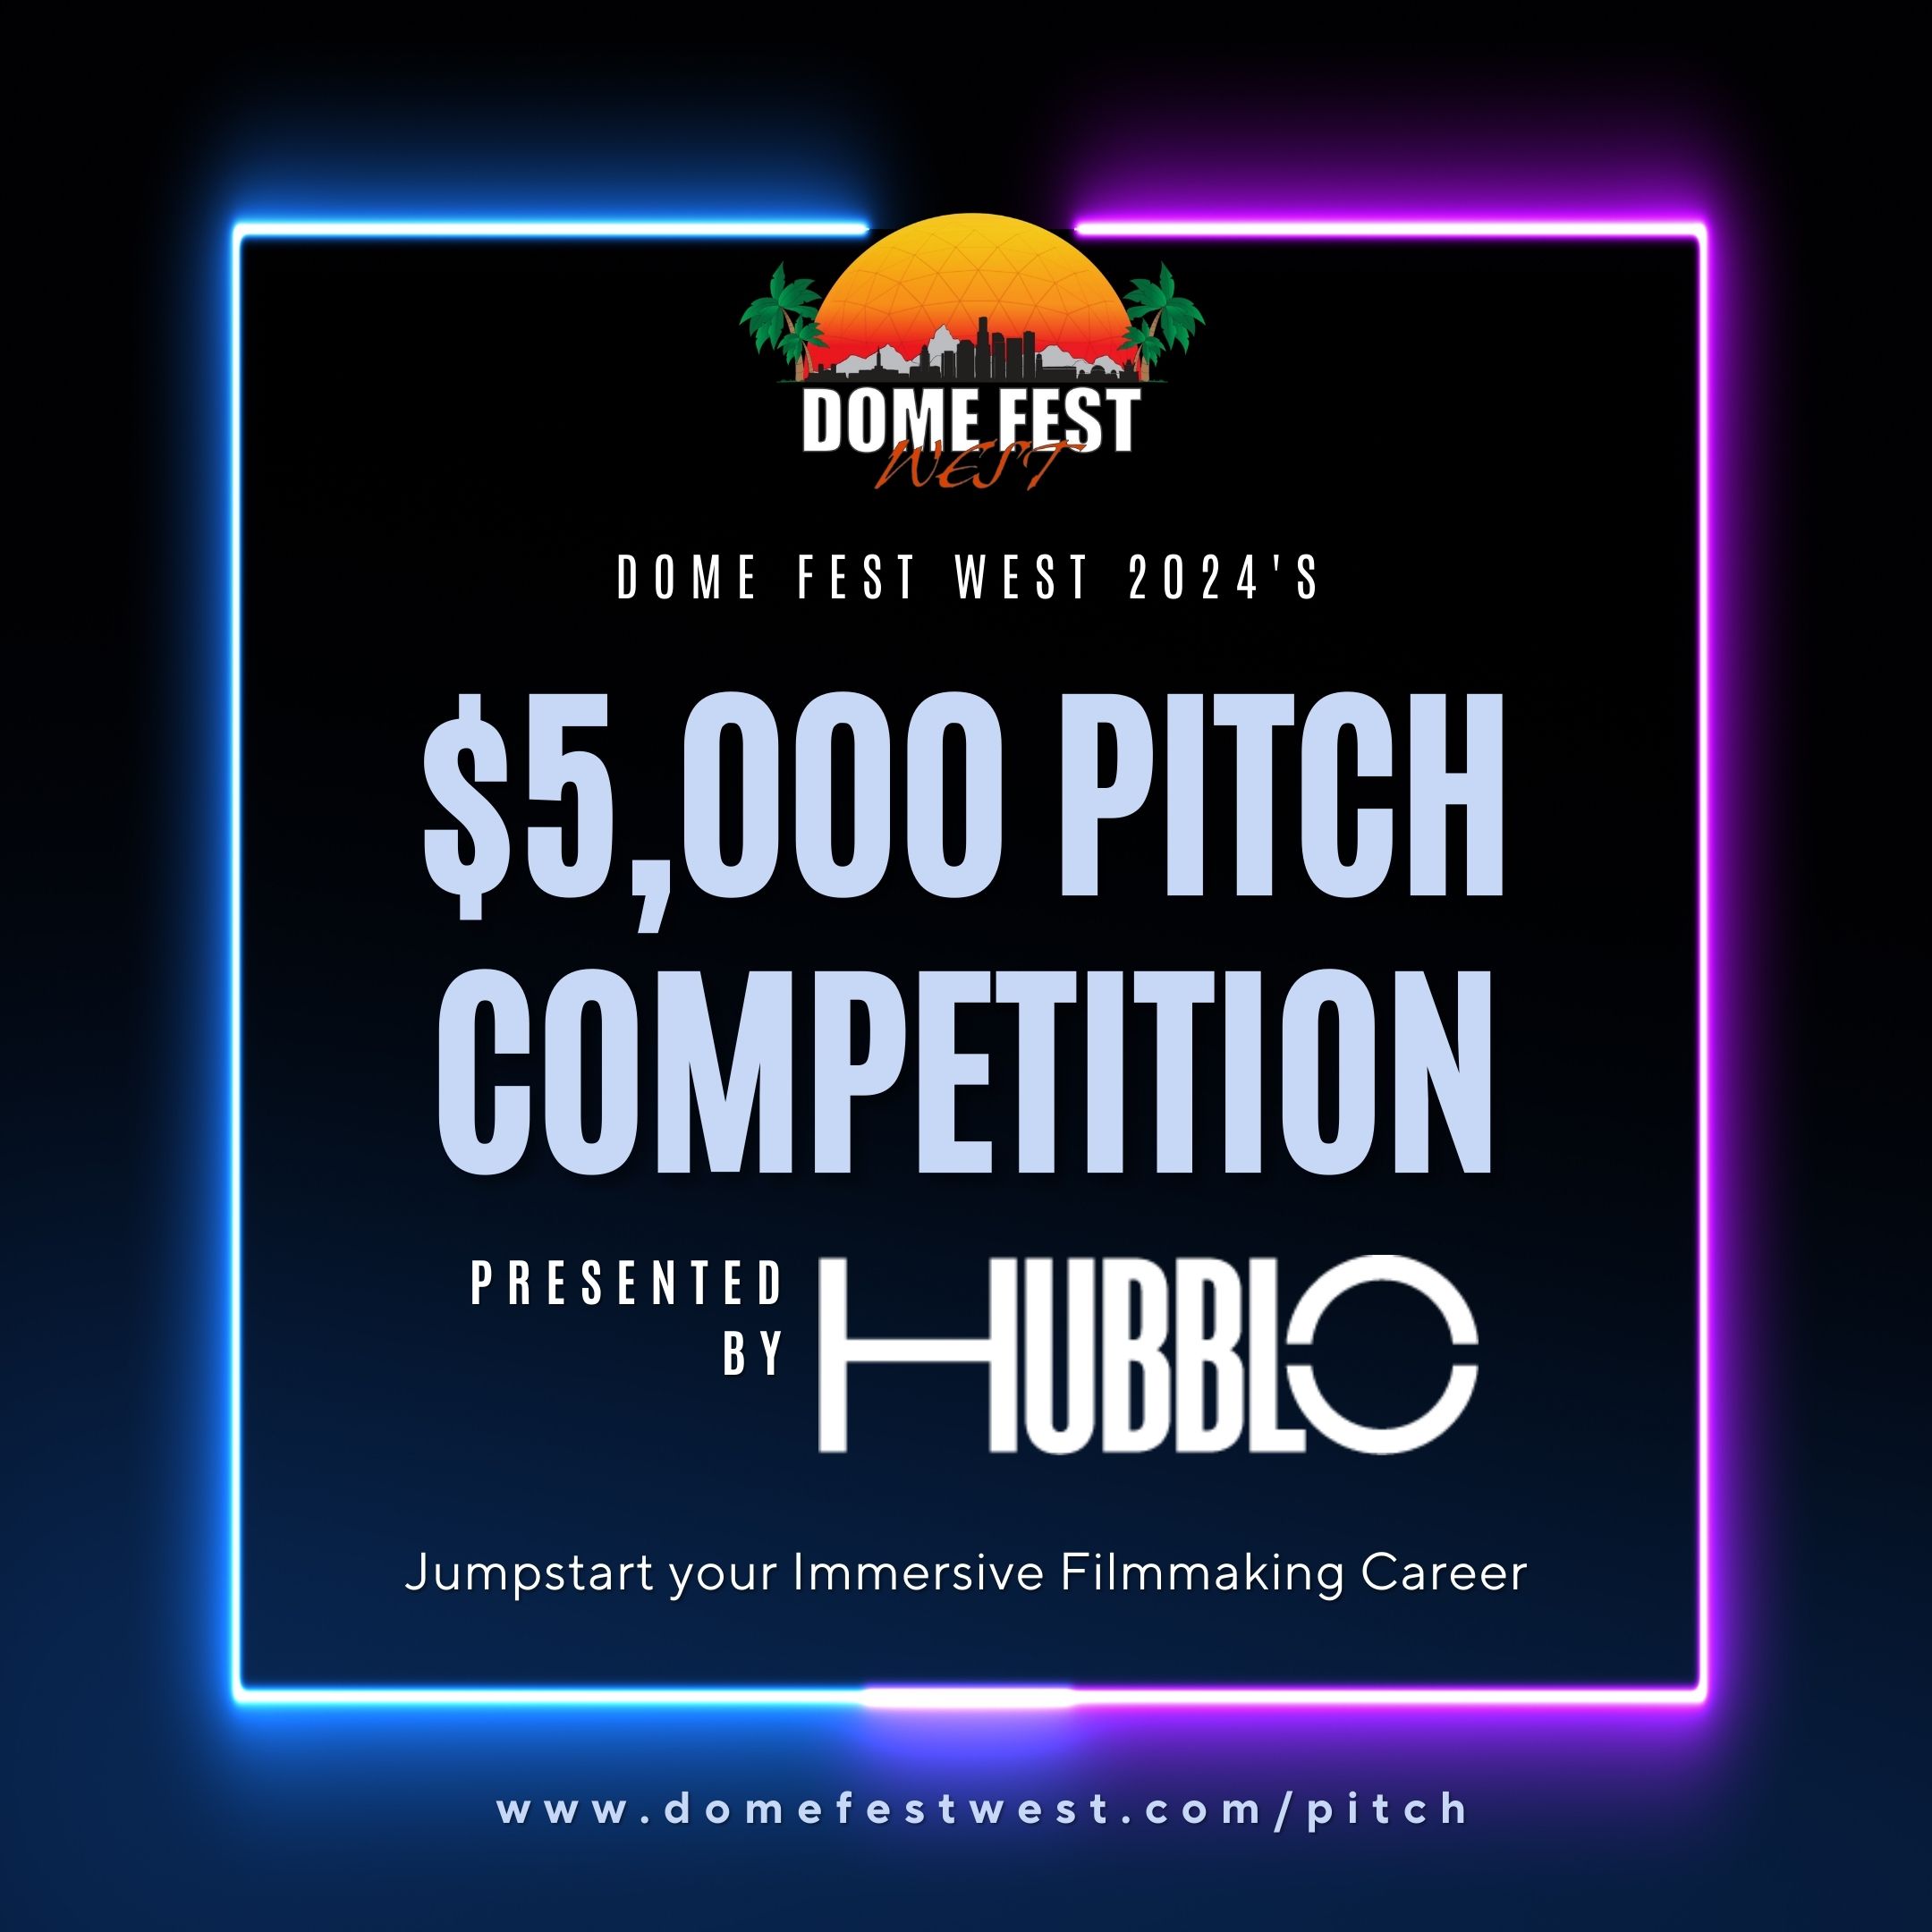 img news fulldome announcing-the-dome-fest-west-5000-pitch-competition